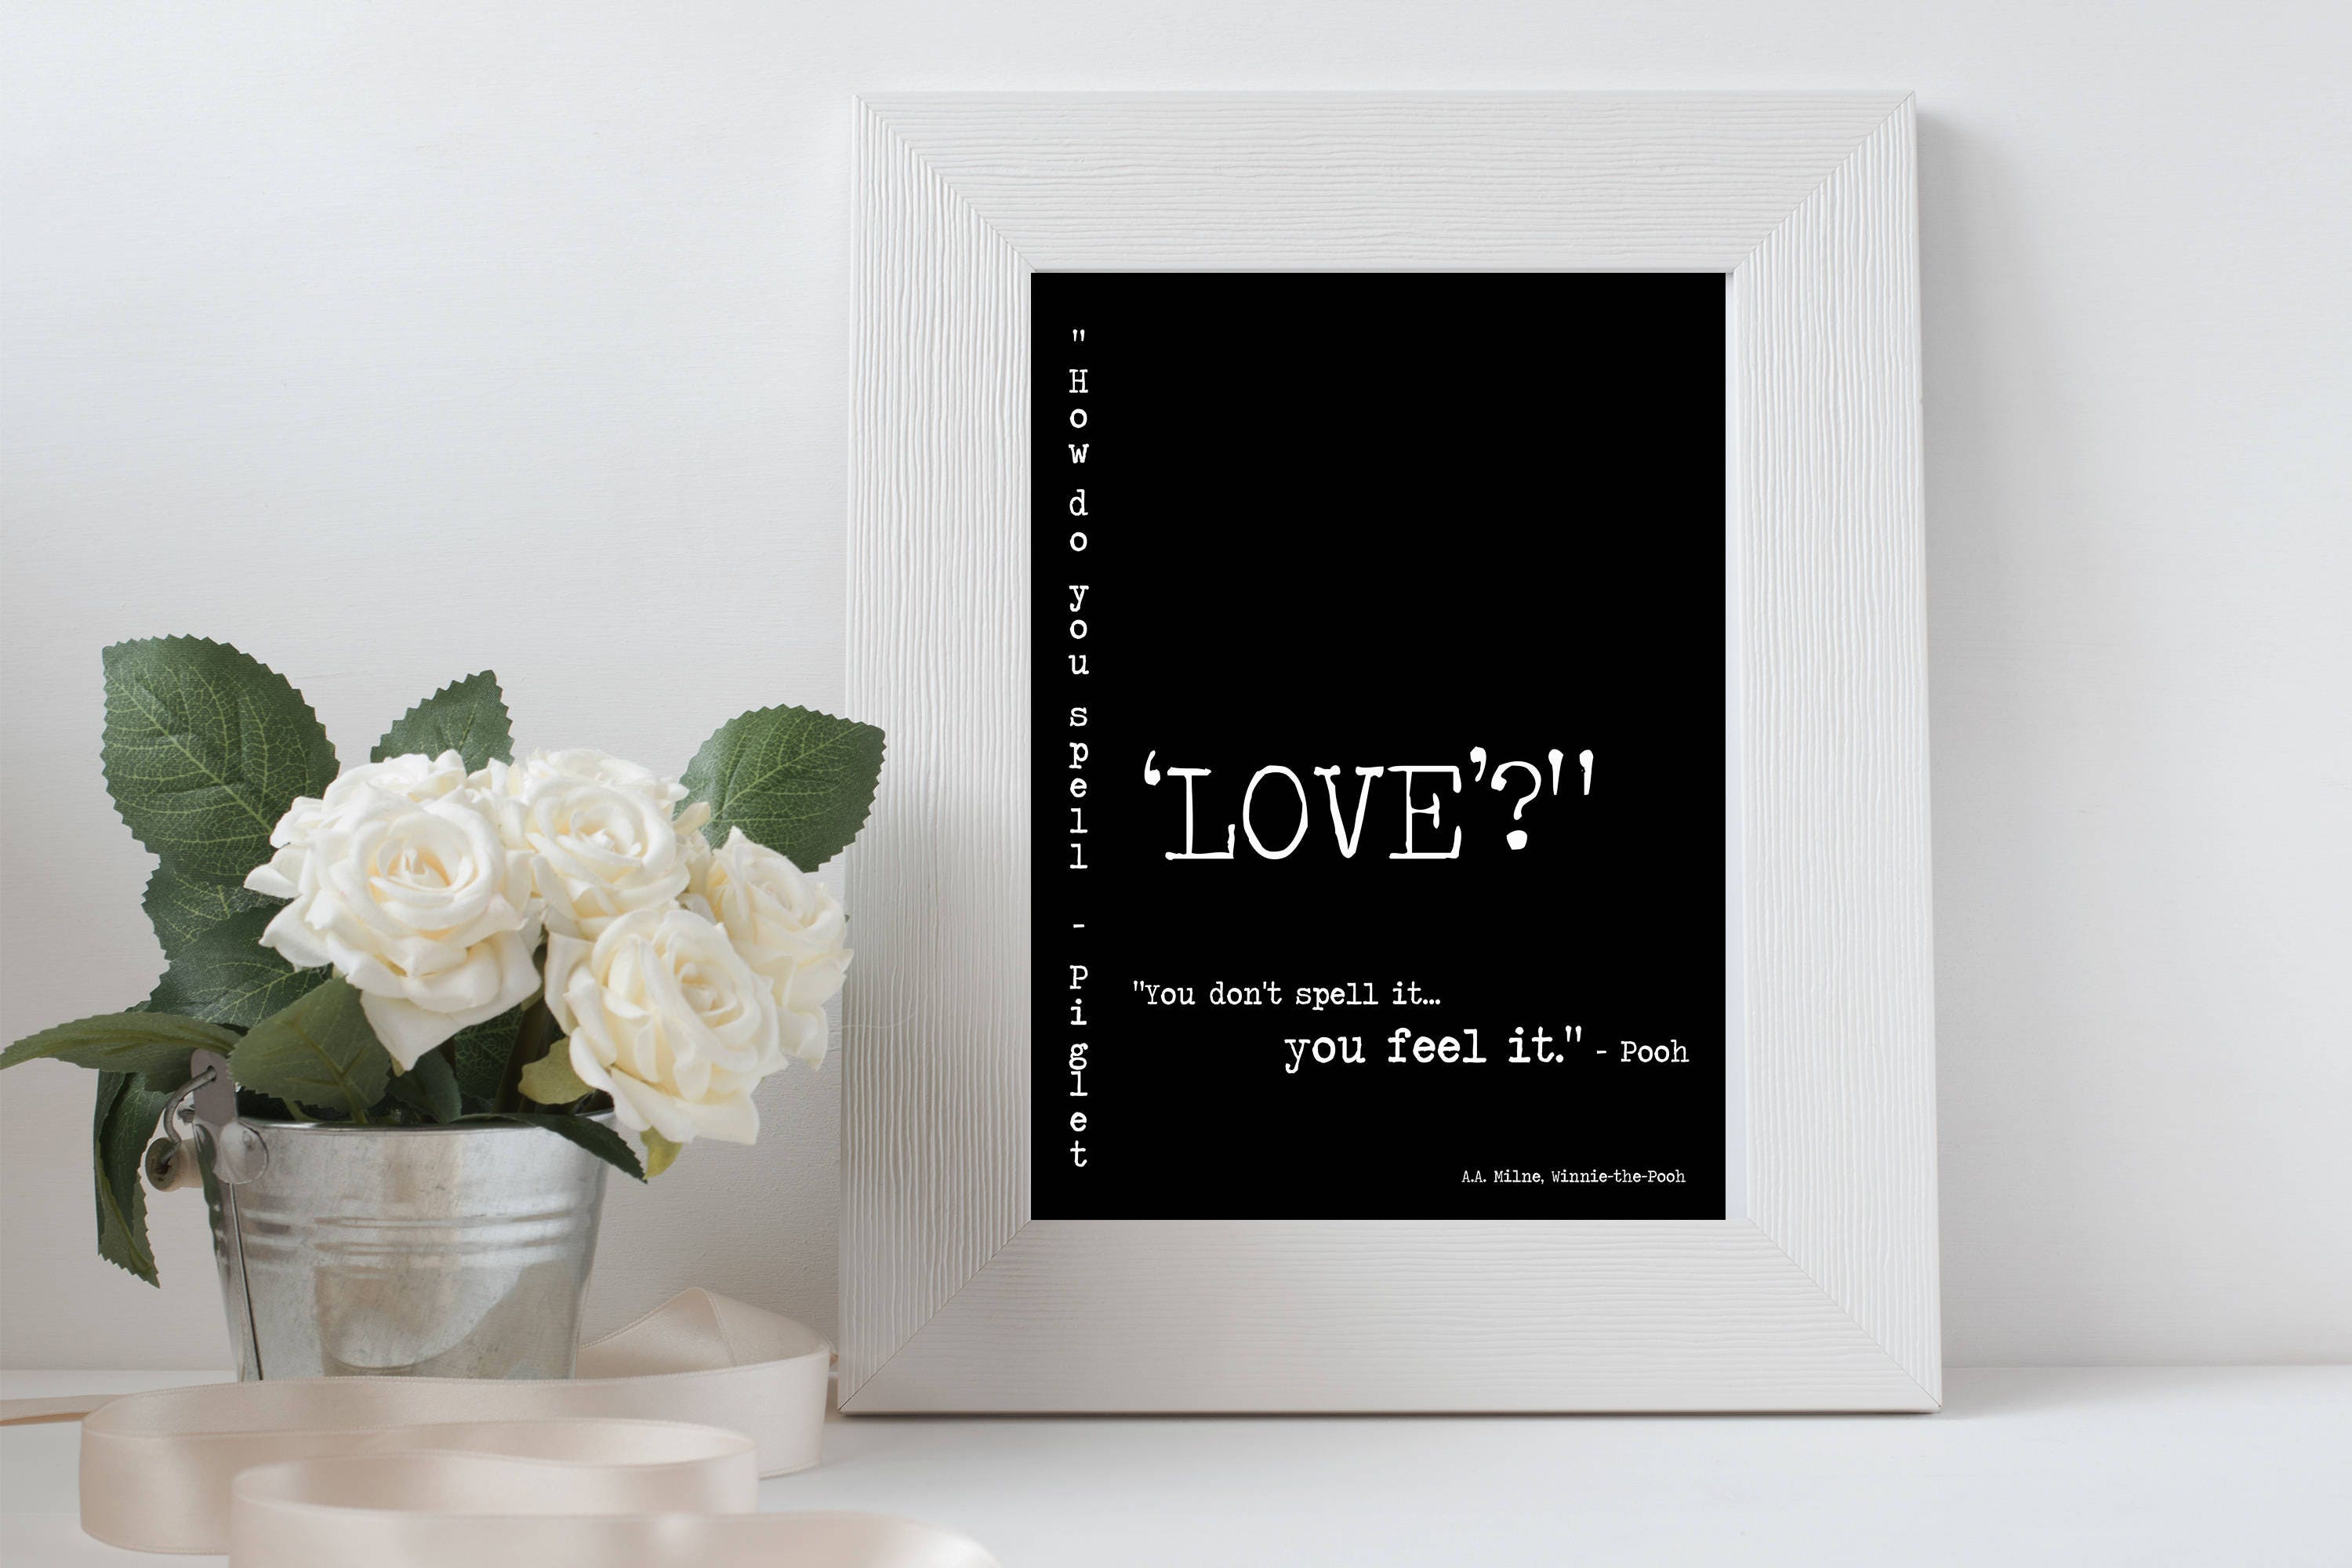 Pooh Quote Romantic Wall Print For Bedroom Decor Or Nursery Art, Winnie The Pooh Art